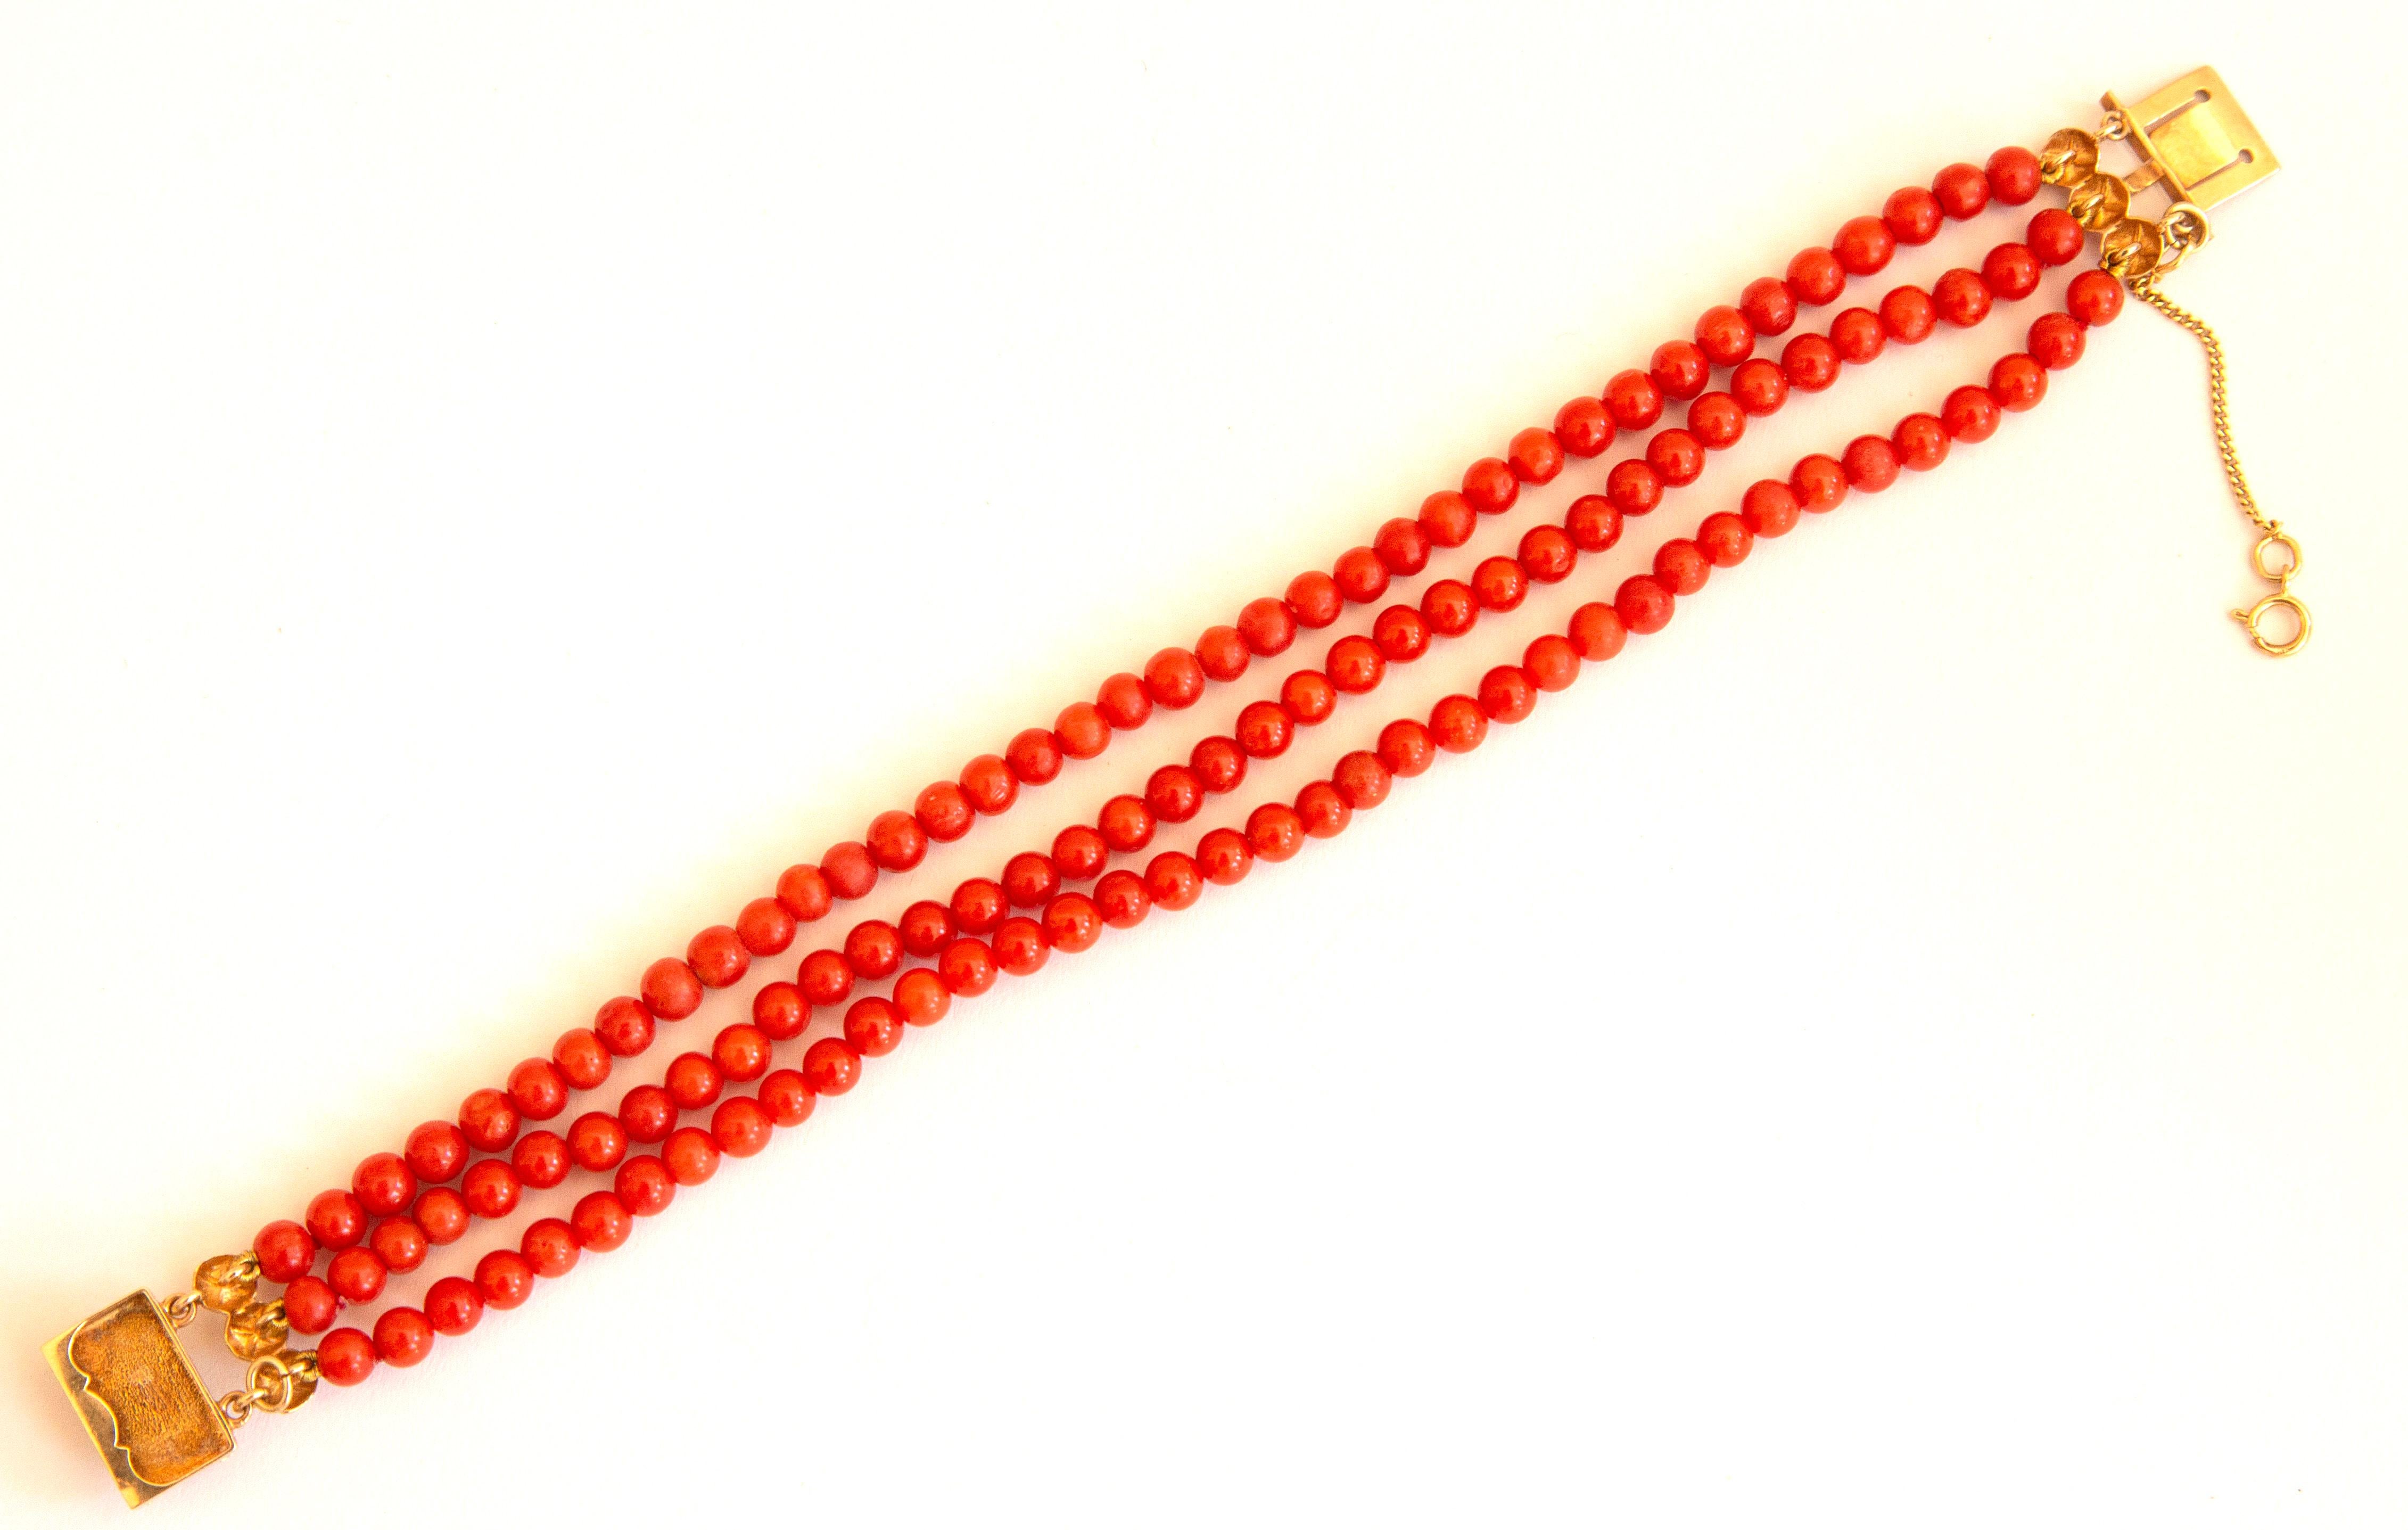 An antique bracelet made of natural red coral beads with 14 karat golden clasp. The bracelet features three strands of round - shaped beads. The diameter of the beads is ca. 5 mm and the color is red. The clasp features a rectangular shape with two